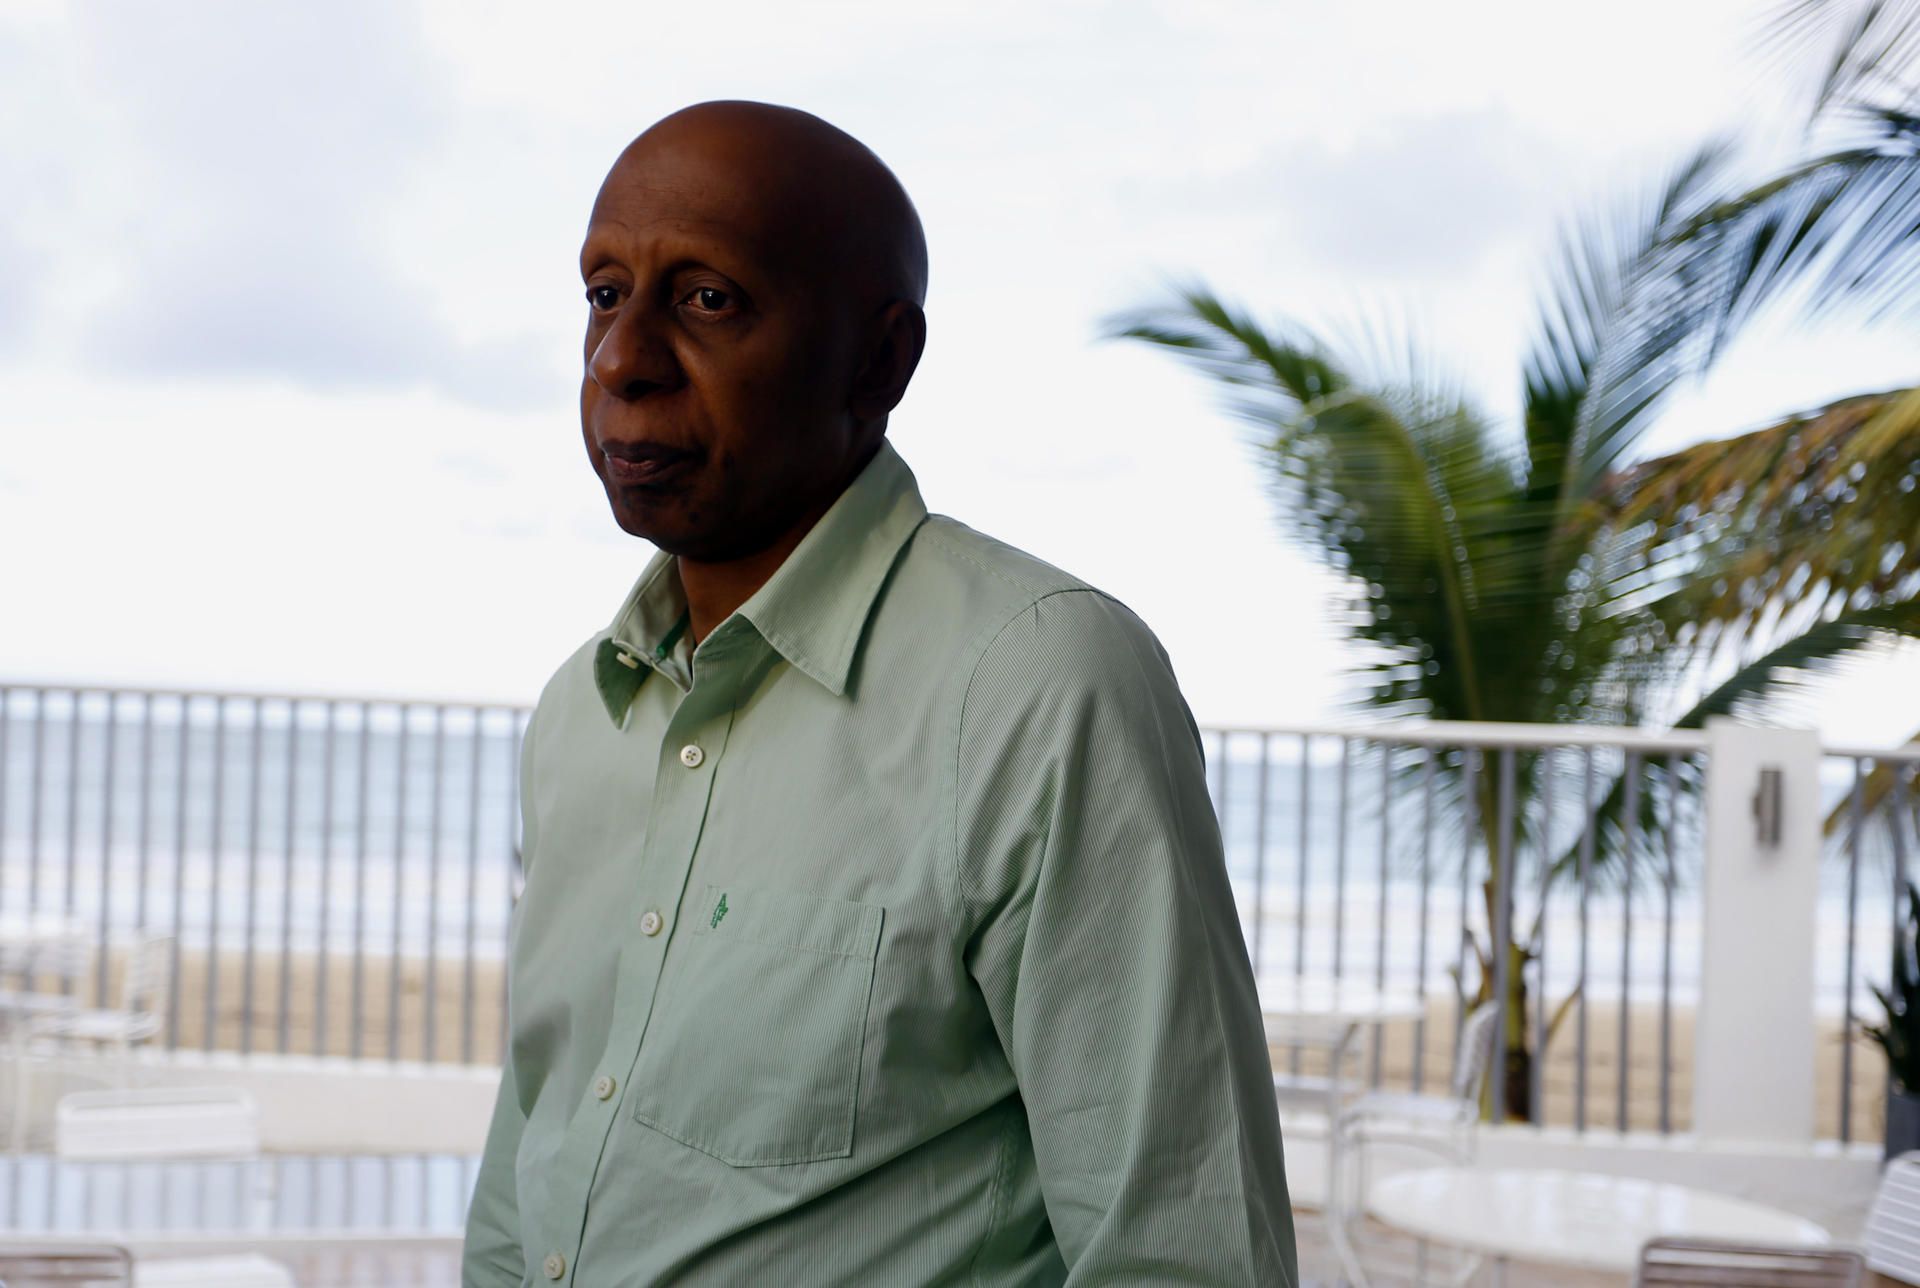 (FILE) Cuban dissident Guillermo Fariñas in a press conference in Carolina (Puerto Rico) today, Saturday, November 26, 2016, following the news of the death of the leader of the Cuban revolution Fidel Castro. EFE/THAIS LLORCA